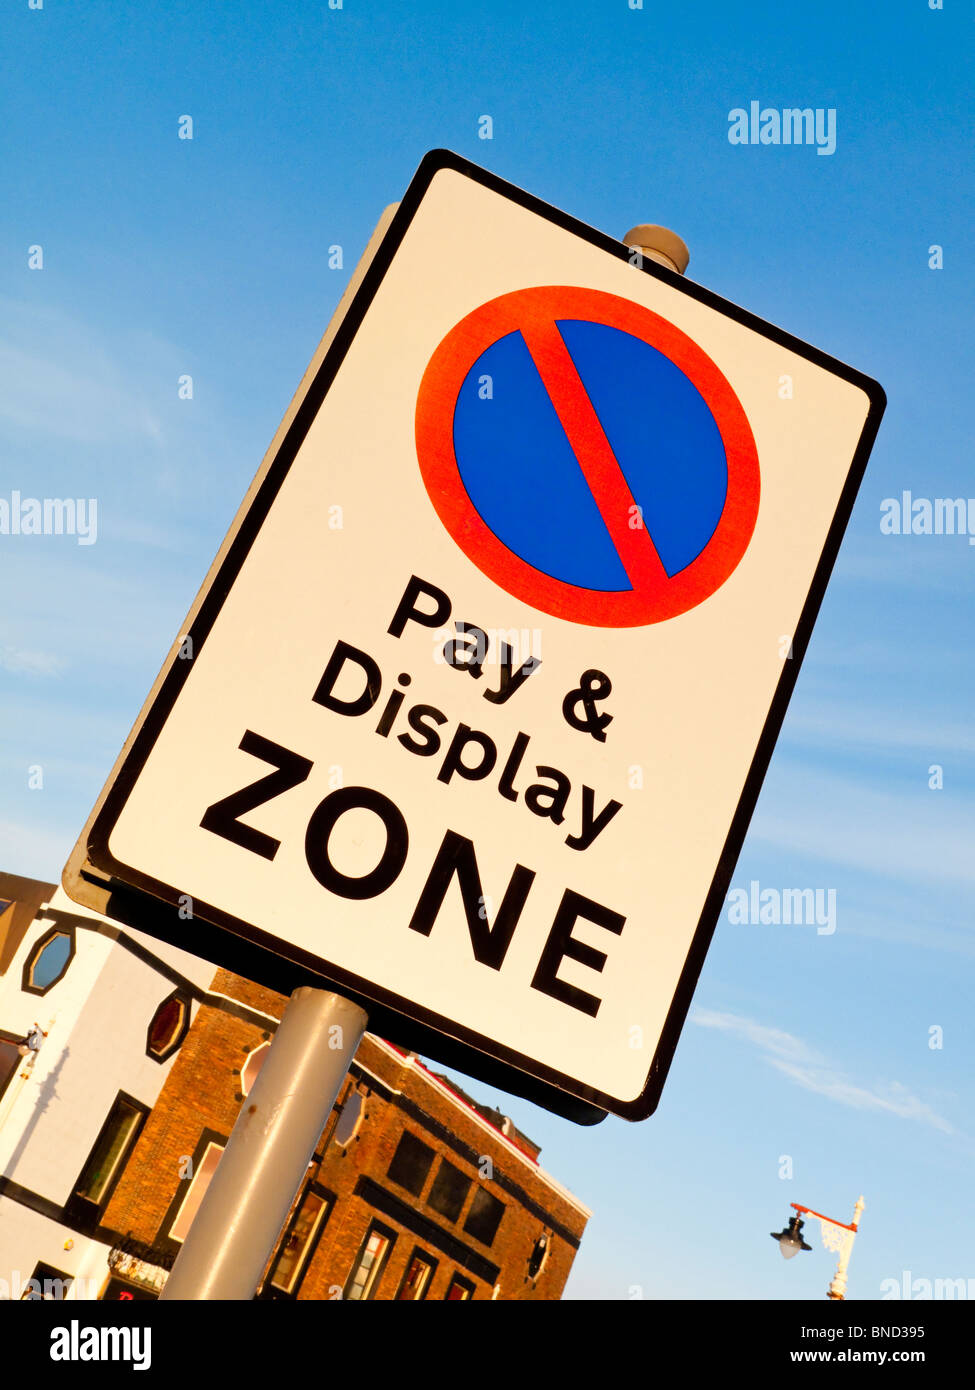 Pay and Display Zone sign with no waiting or parking symbol in a town in the UK Stock Photo